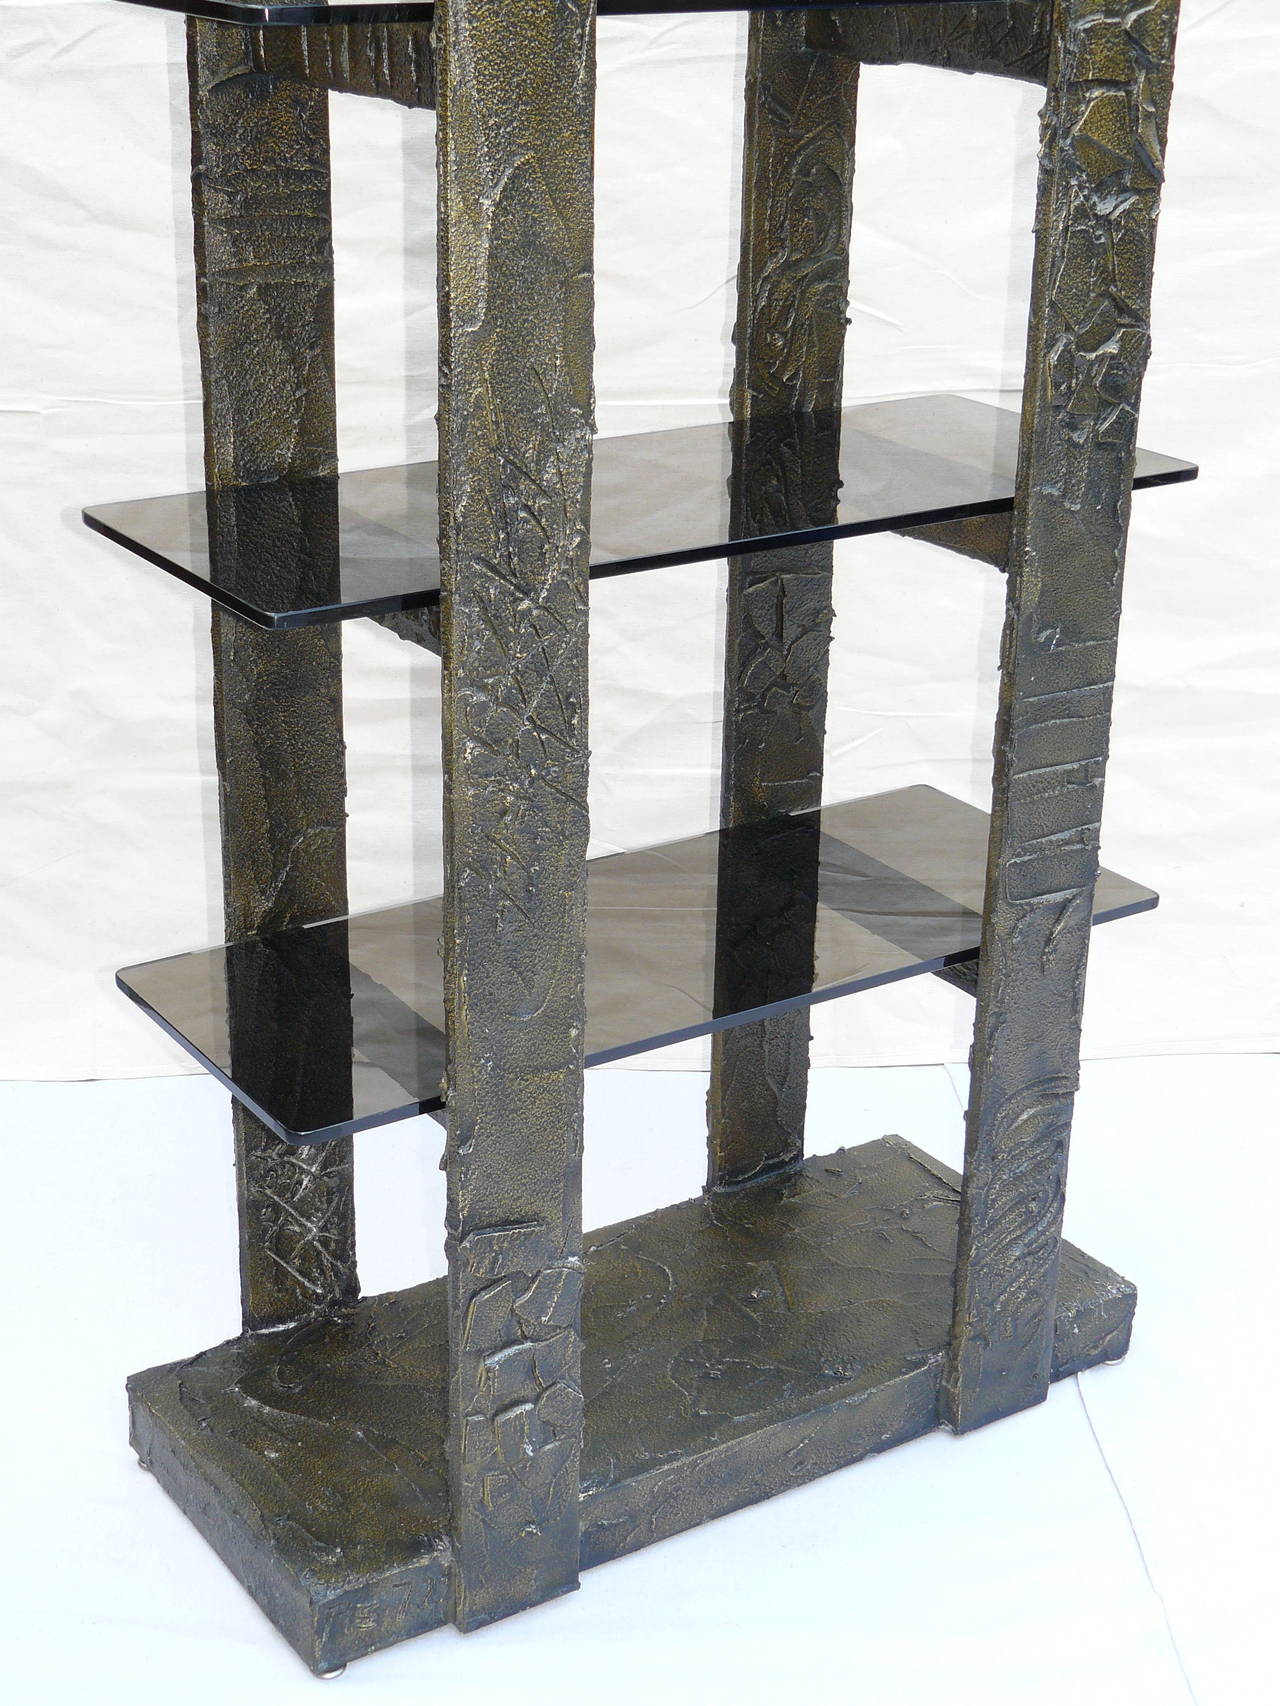 1972 signed Paul Evans for Directional Brutalist sculpted bronze shelving unit.

Paul Evans bronze resin with bronze glass, produced exclusively for the Directional 